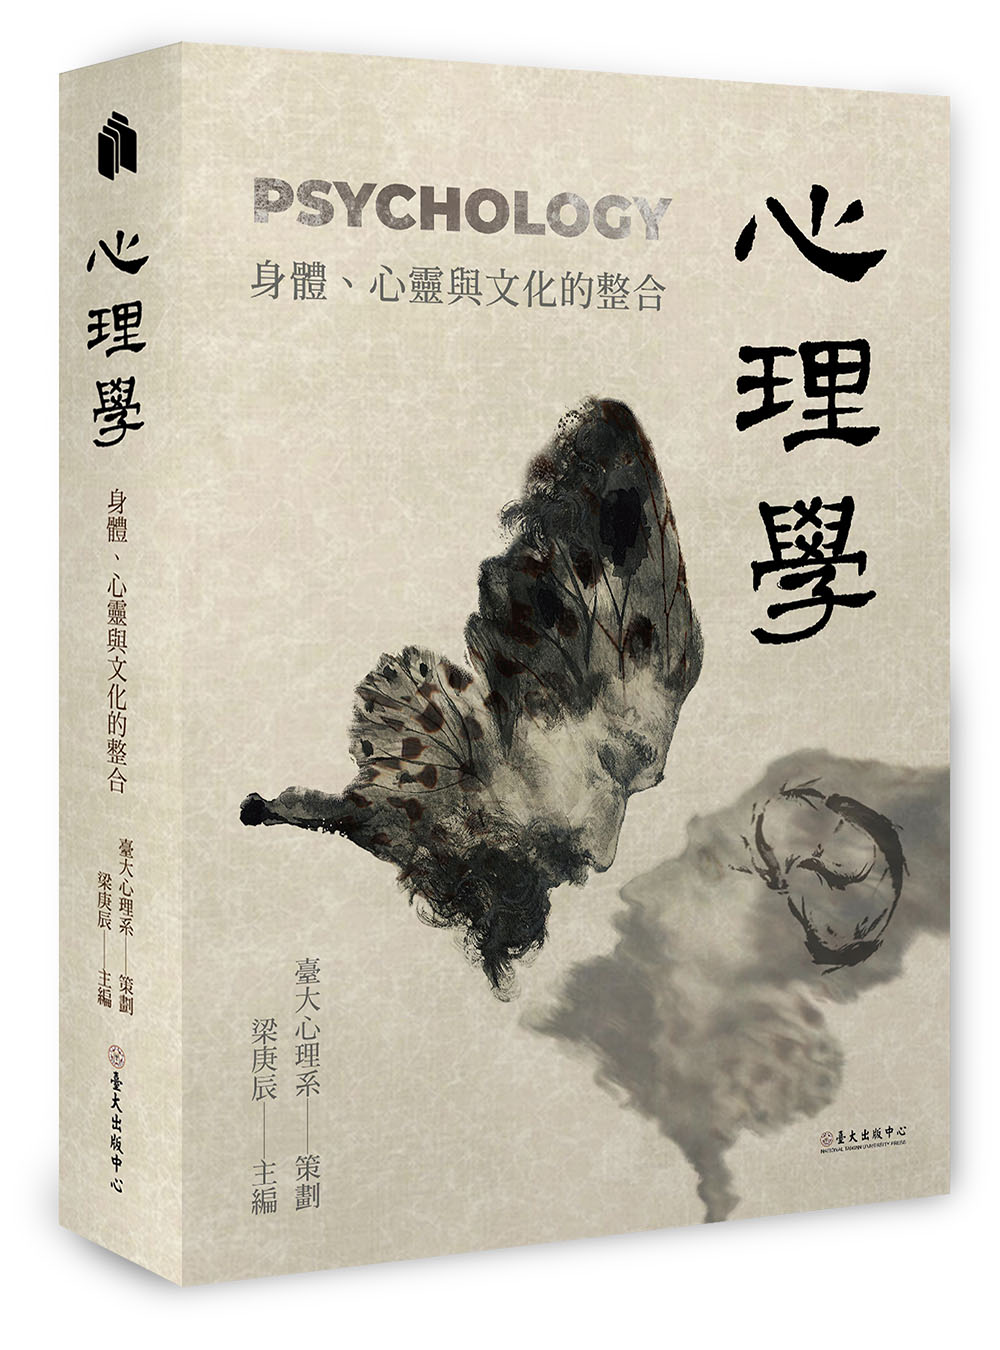 Psychology: An Integration of Body, Mind and Culture